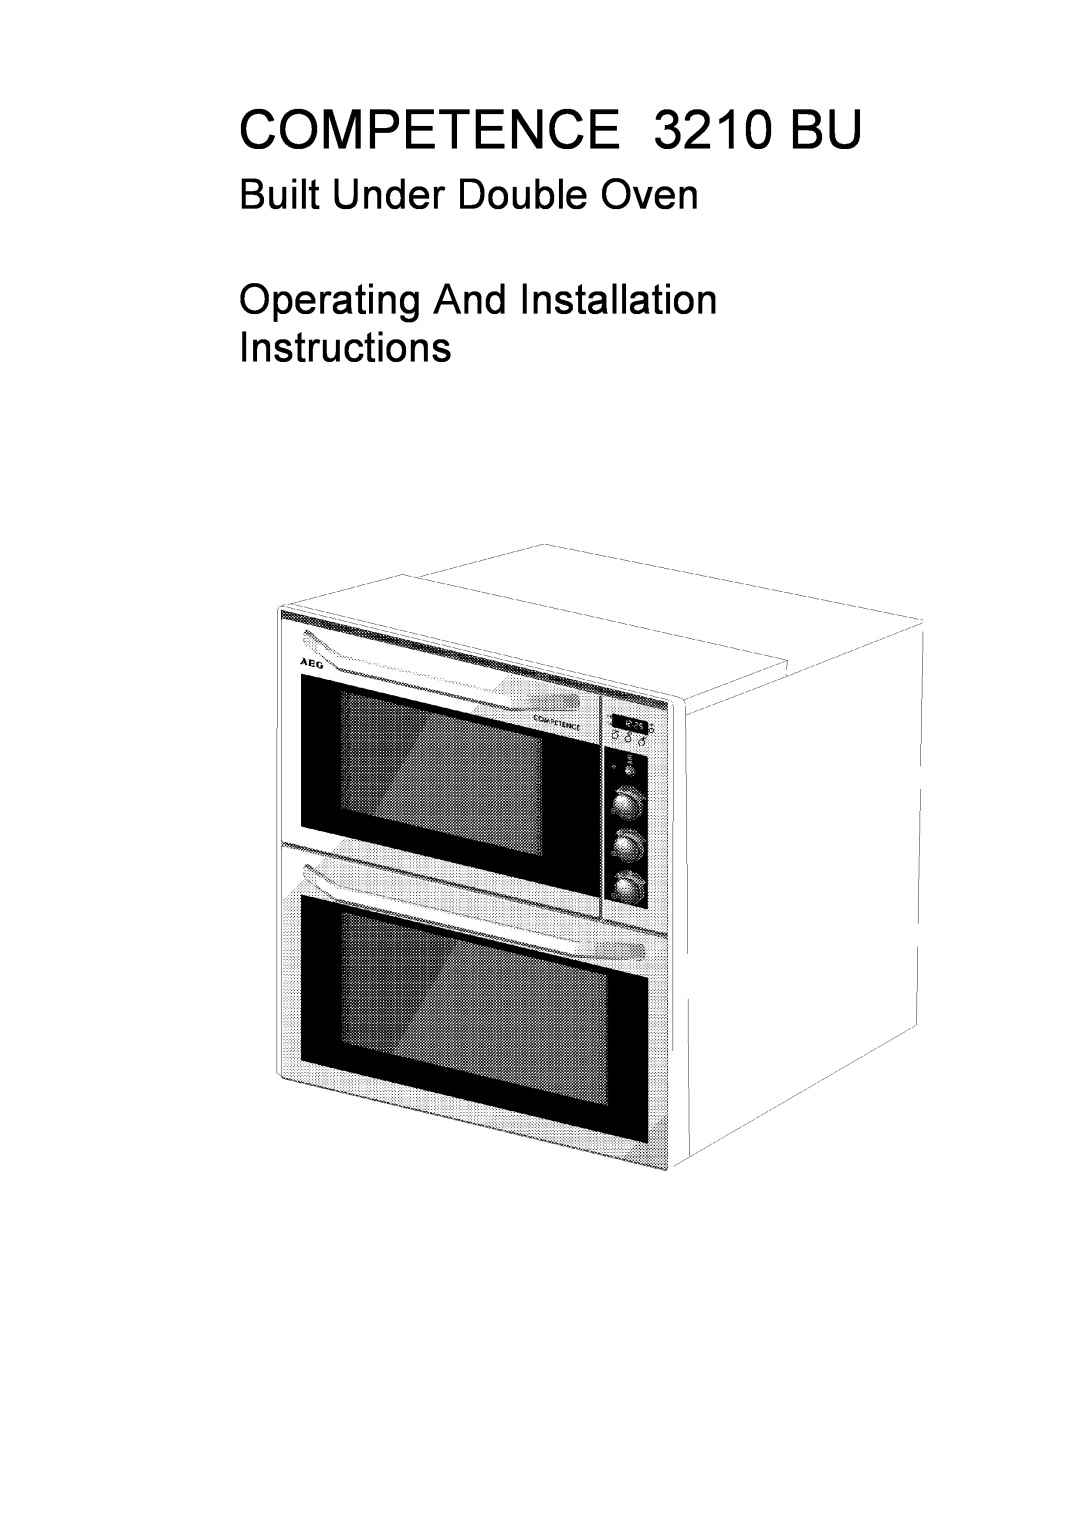 AEG installation instructions COMPETENCE 3210 BU, Built Under Double Oven Operating And Installation Instructions 